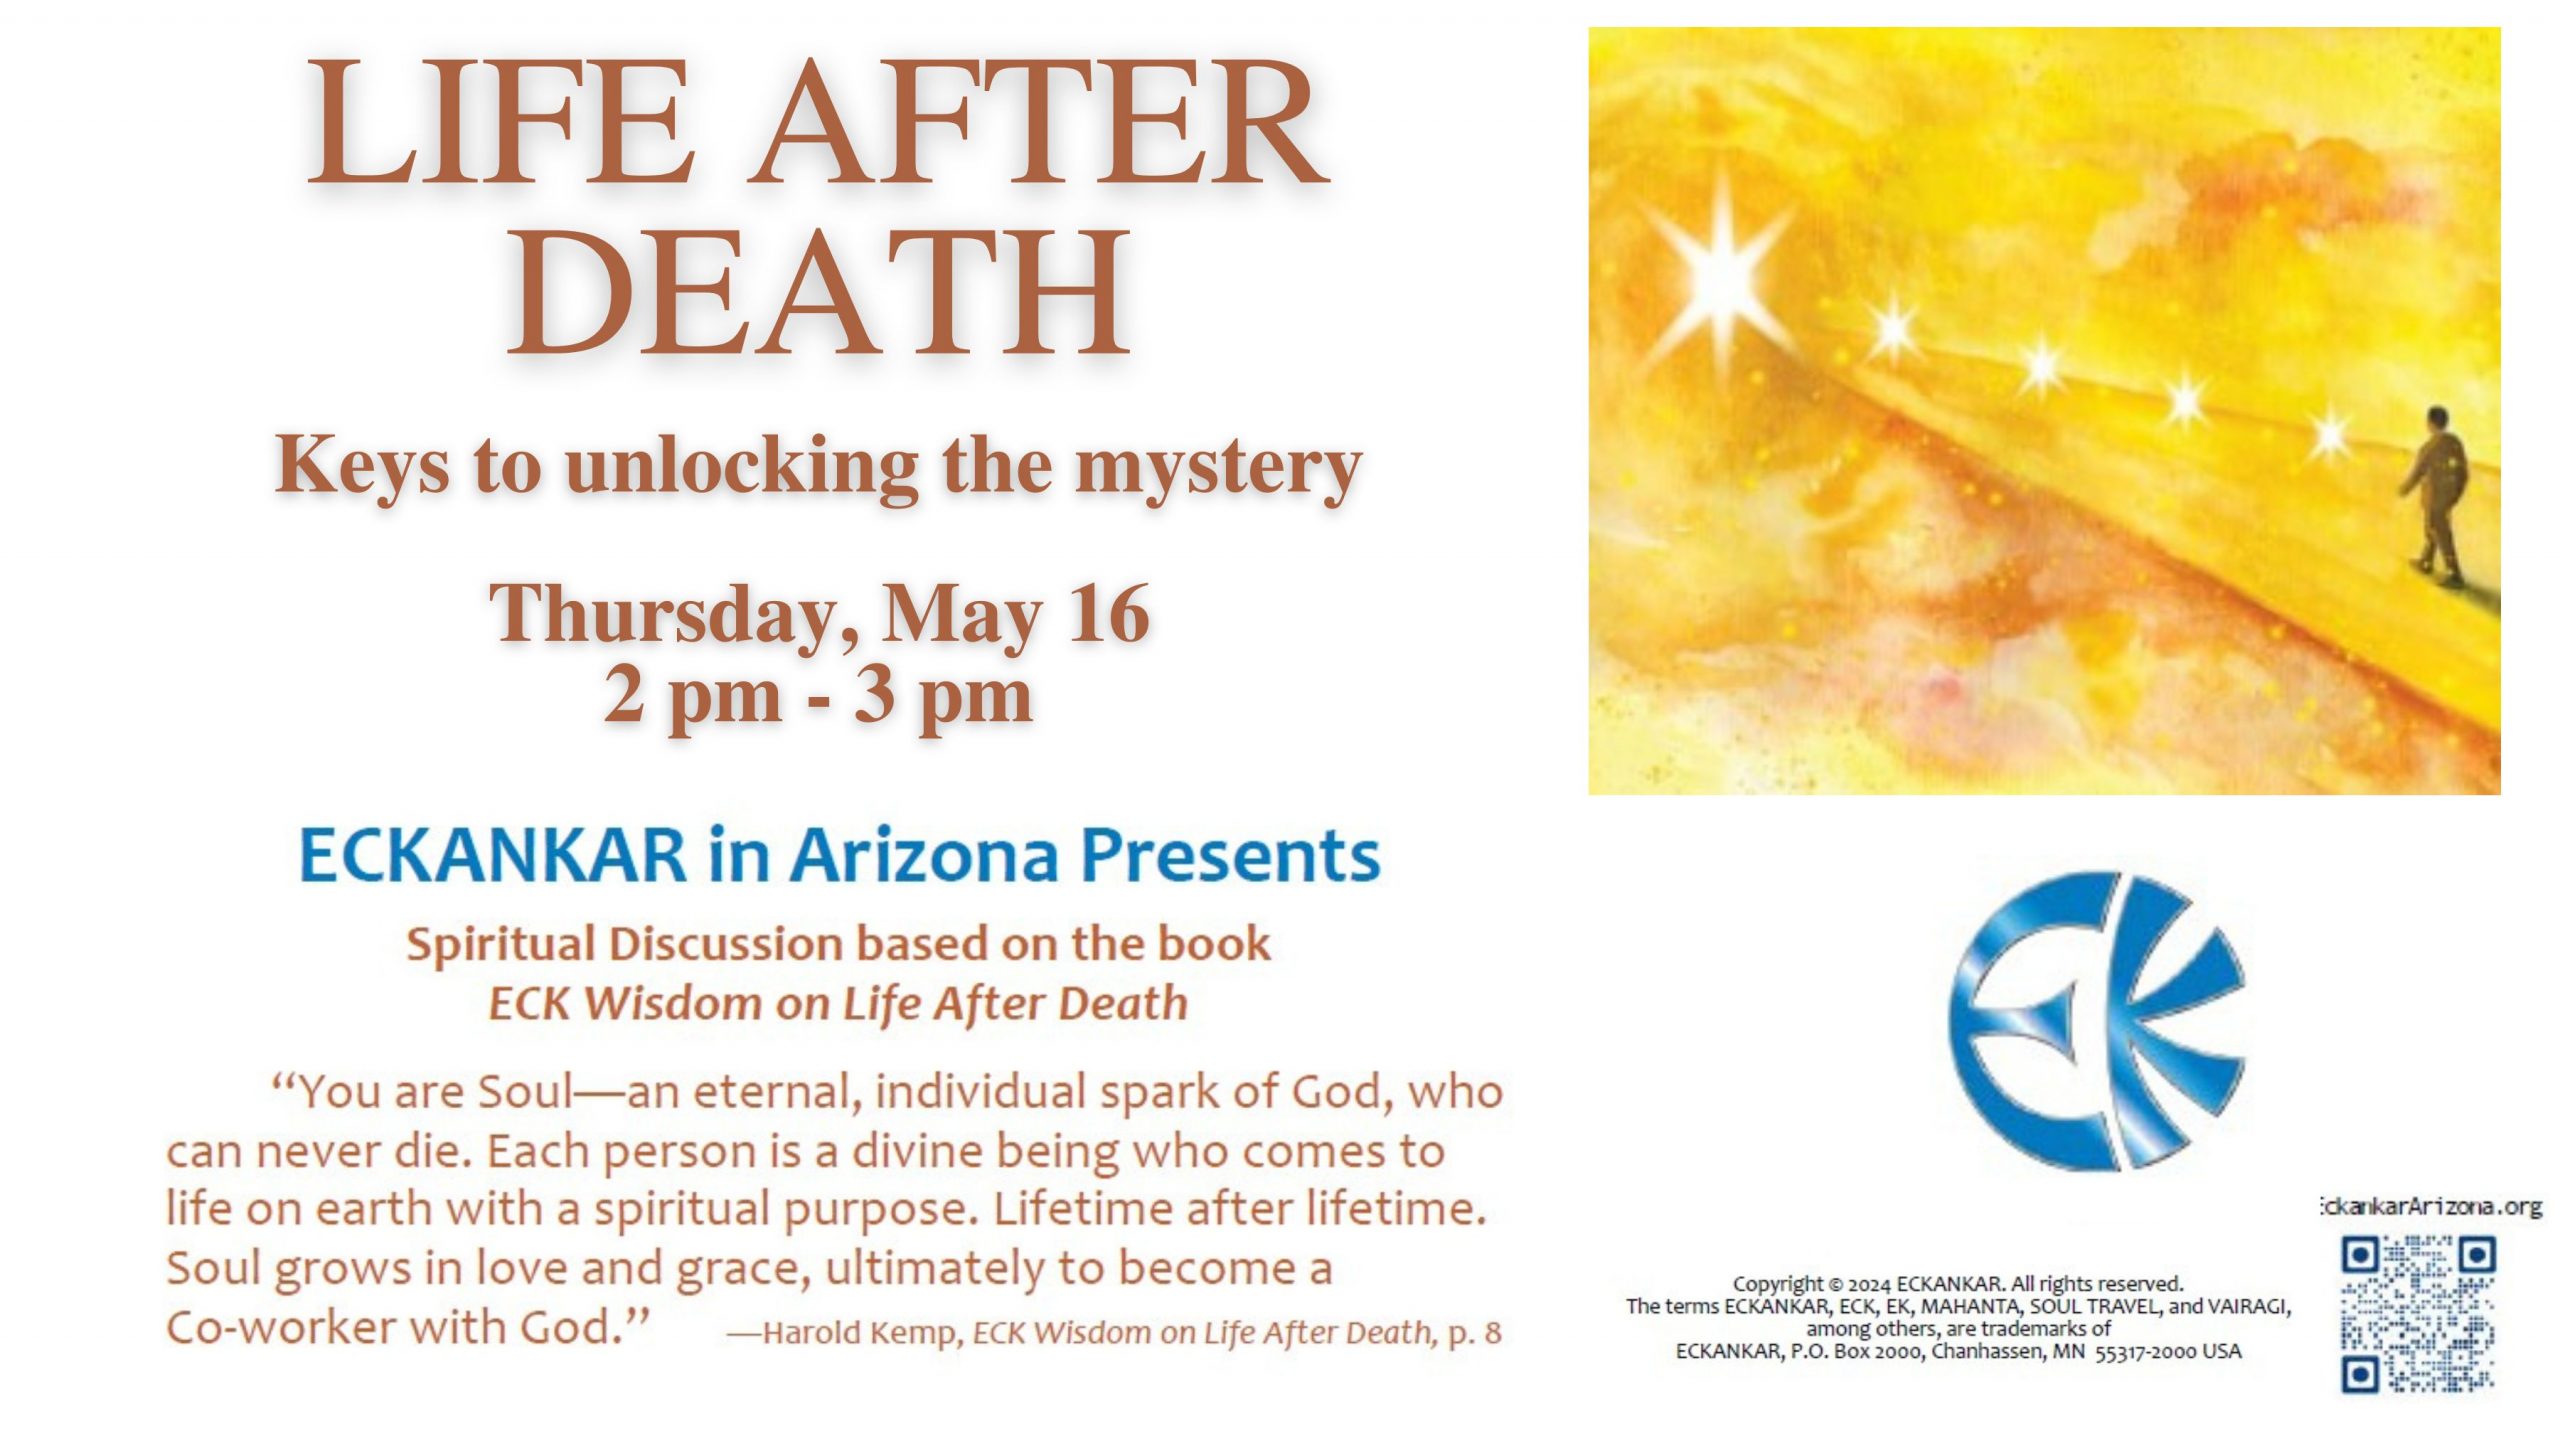 life after death discussion at the desert foothills library